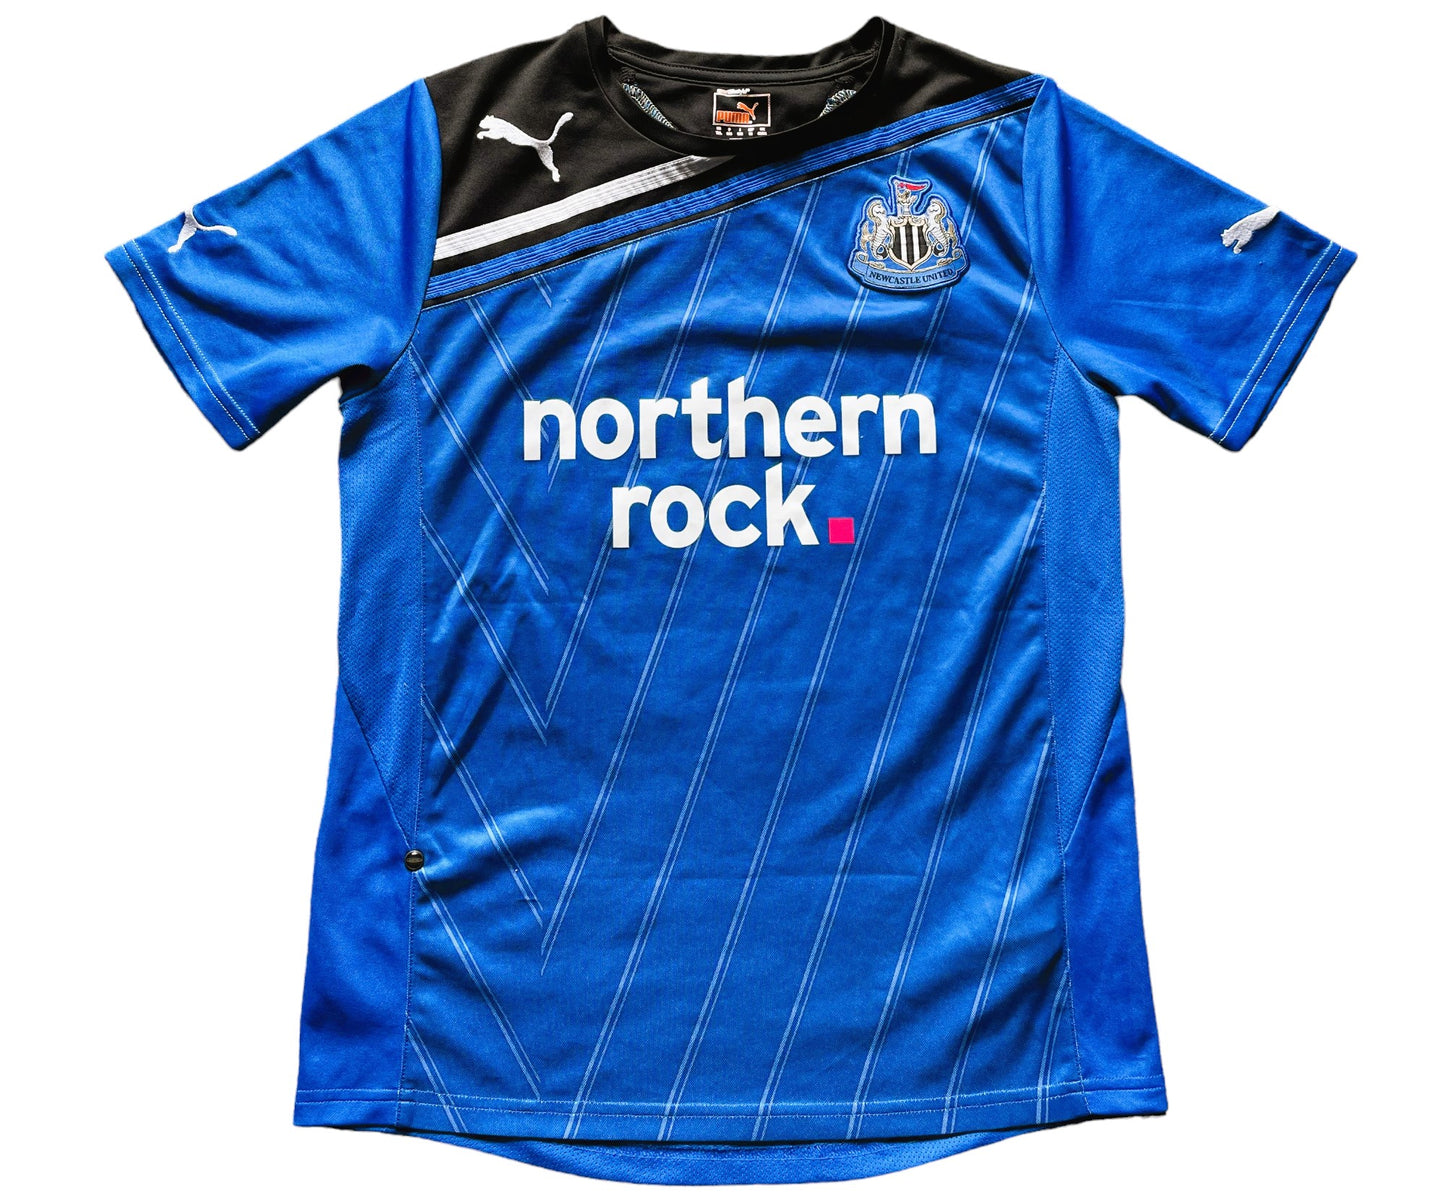 Newcastle 2011 Training Shirt (very good) Adults XS / Youths see below